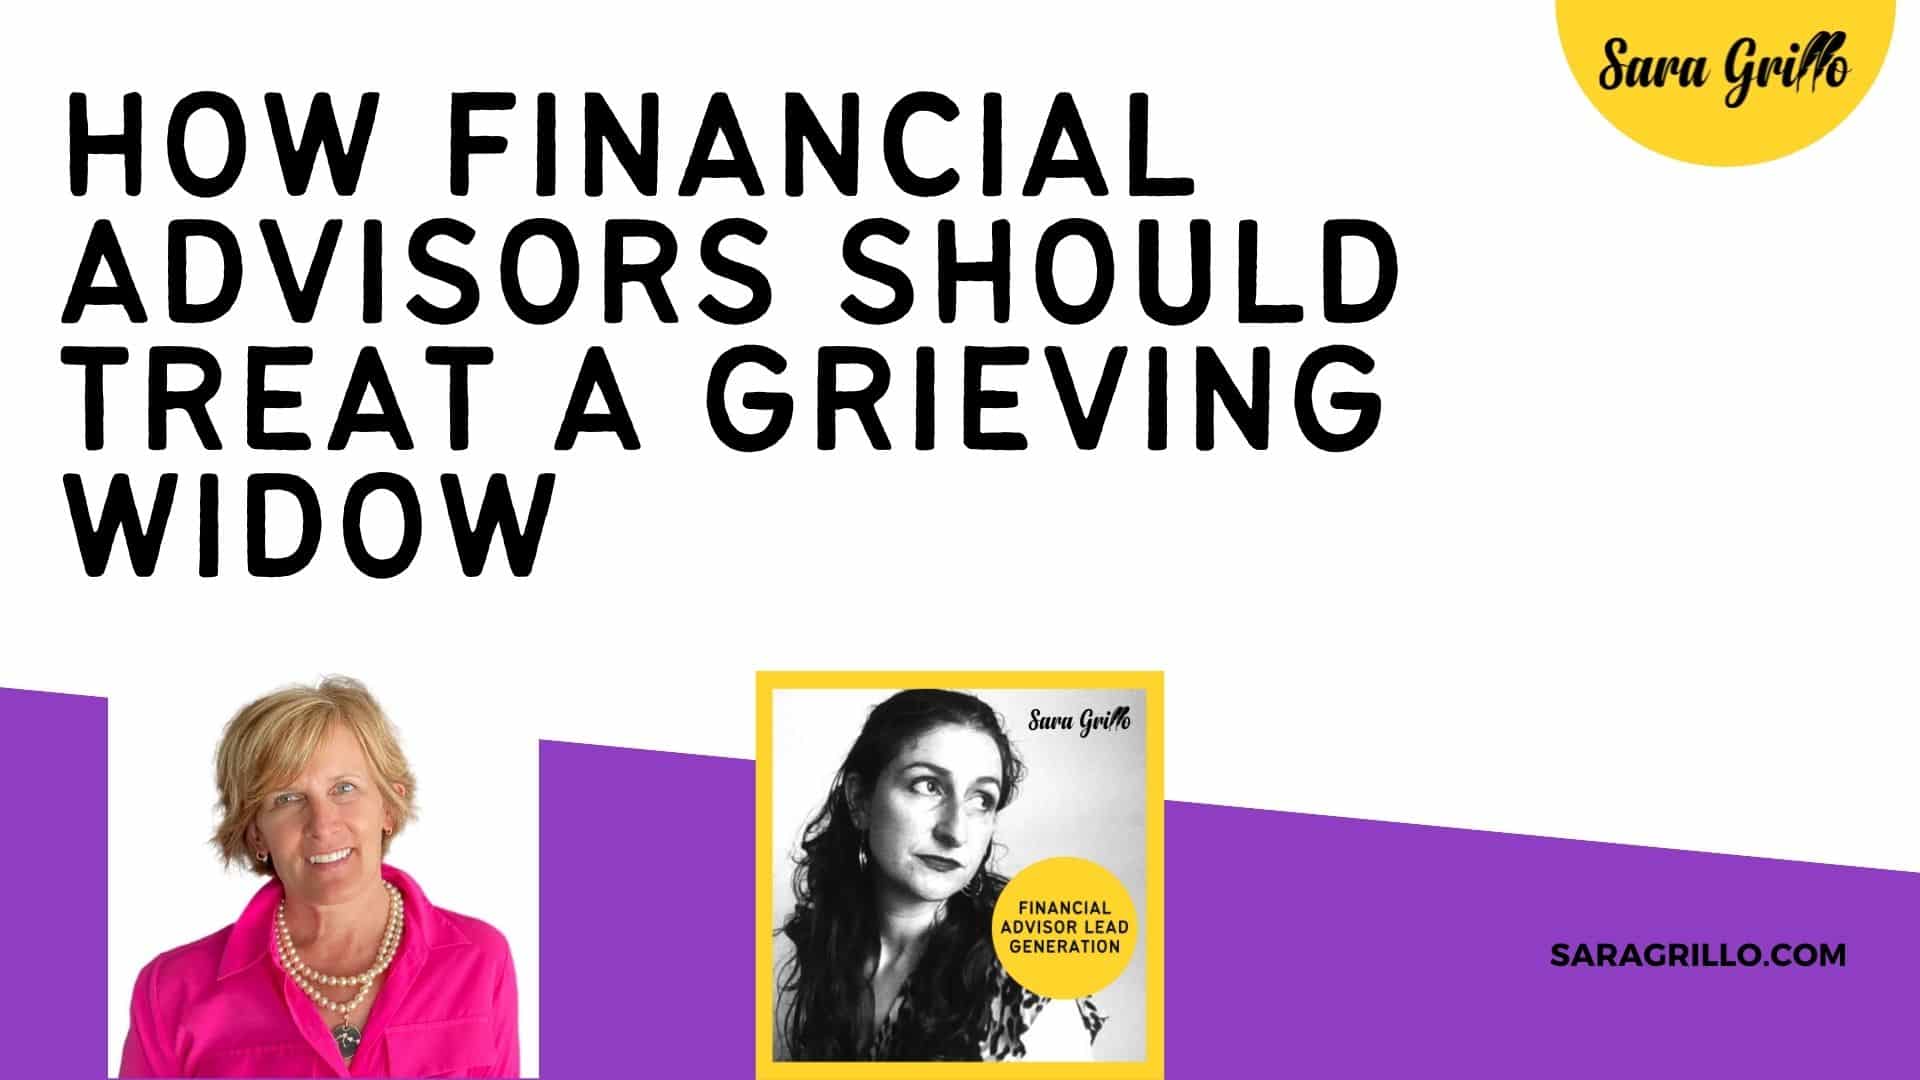 In this podcast we talk about how to be a financial advisor for widows, what to say and what not to say with advice from a grief expert.